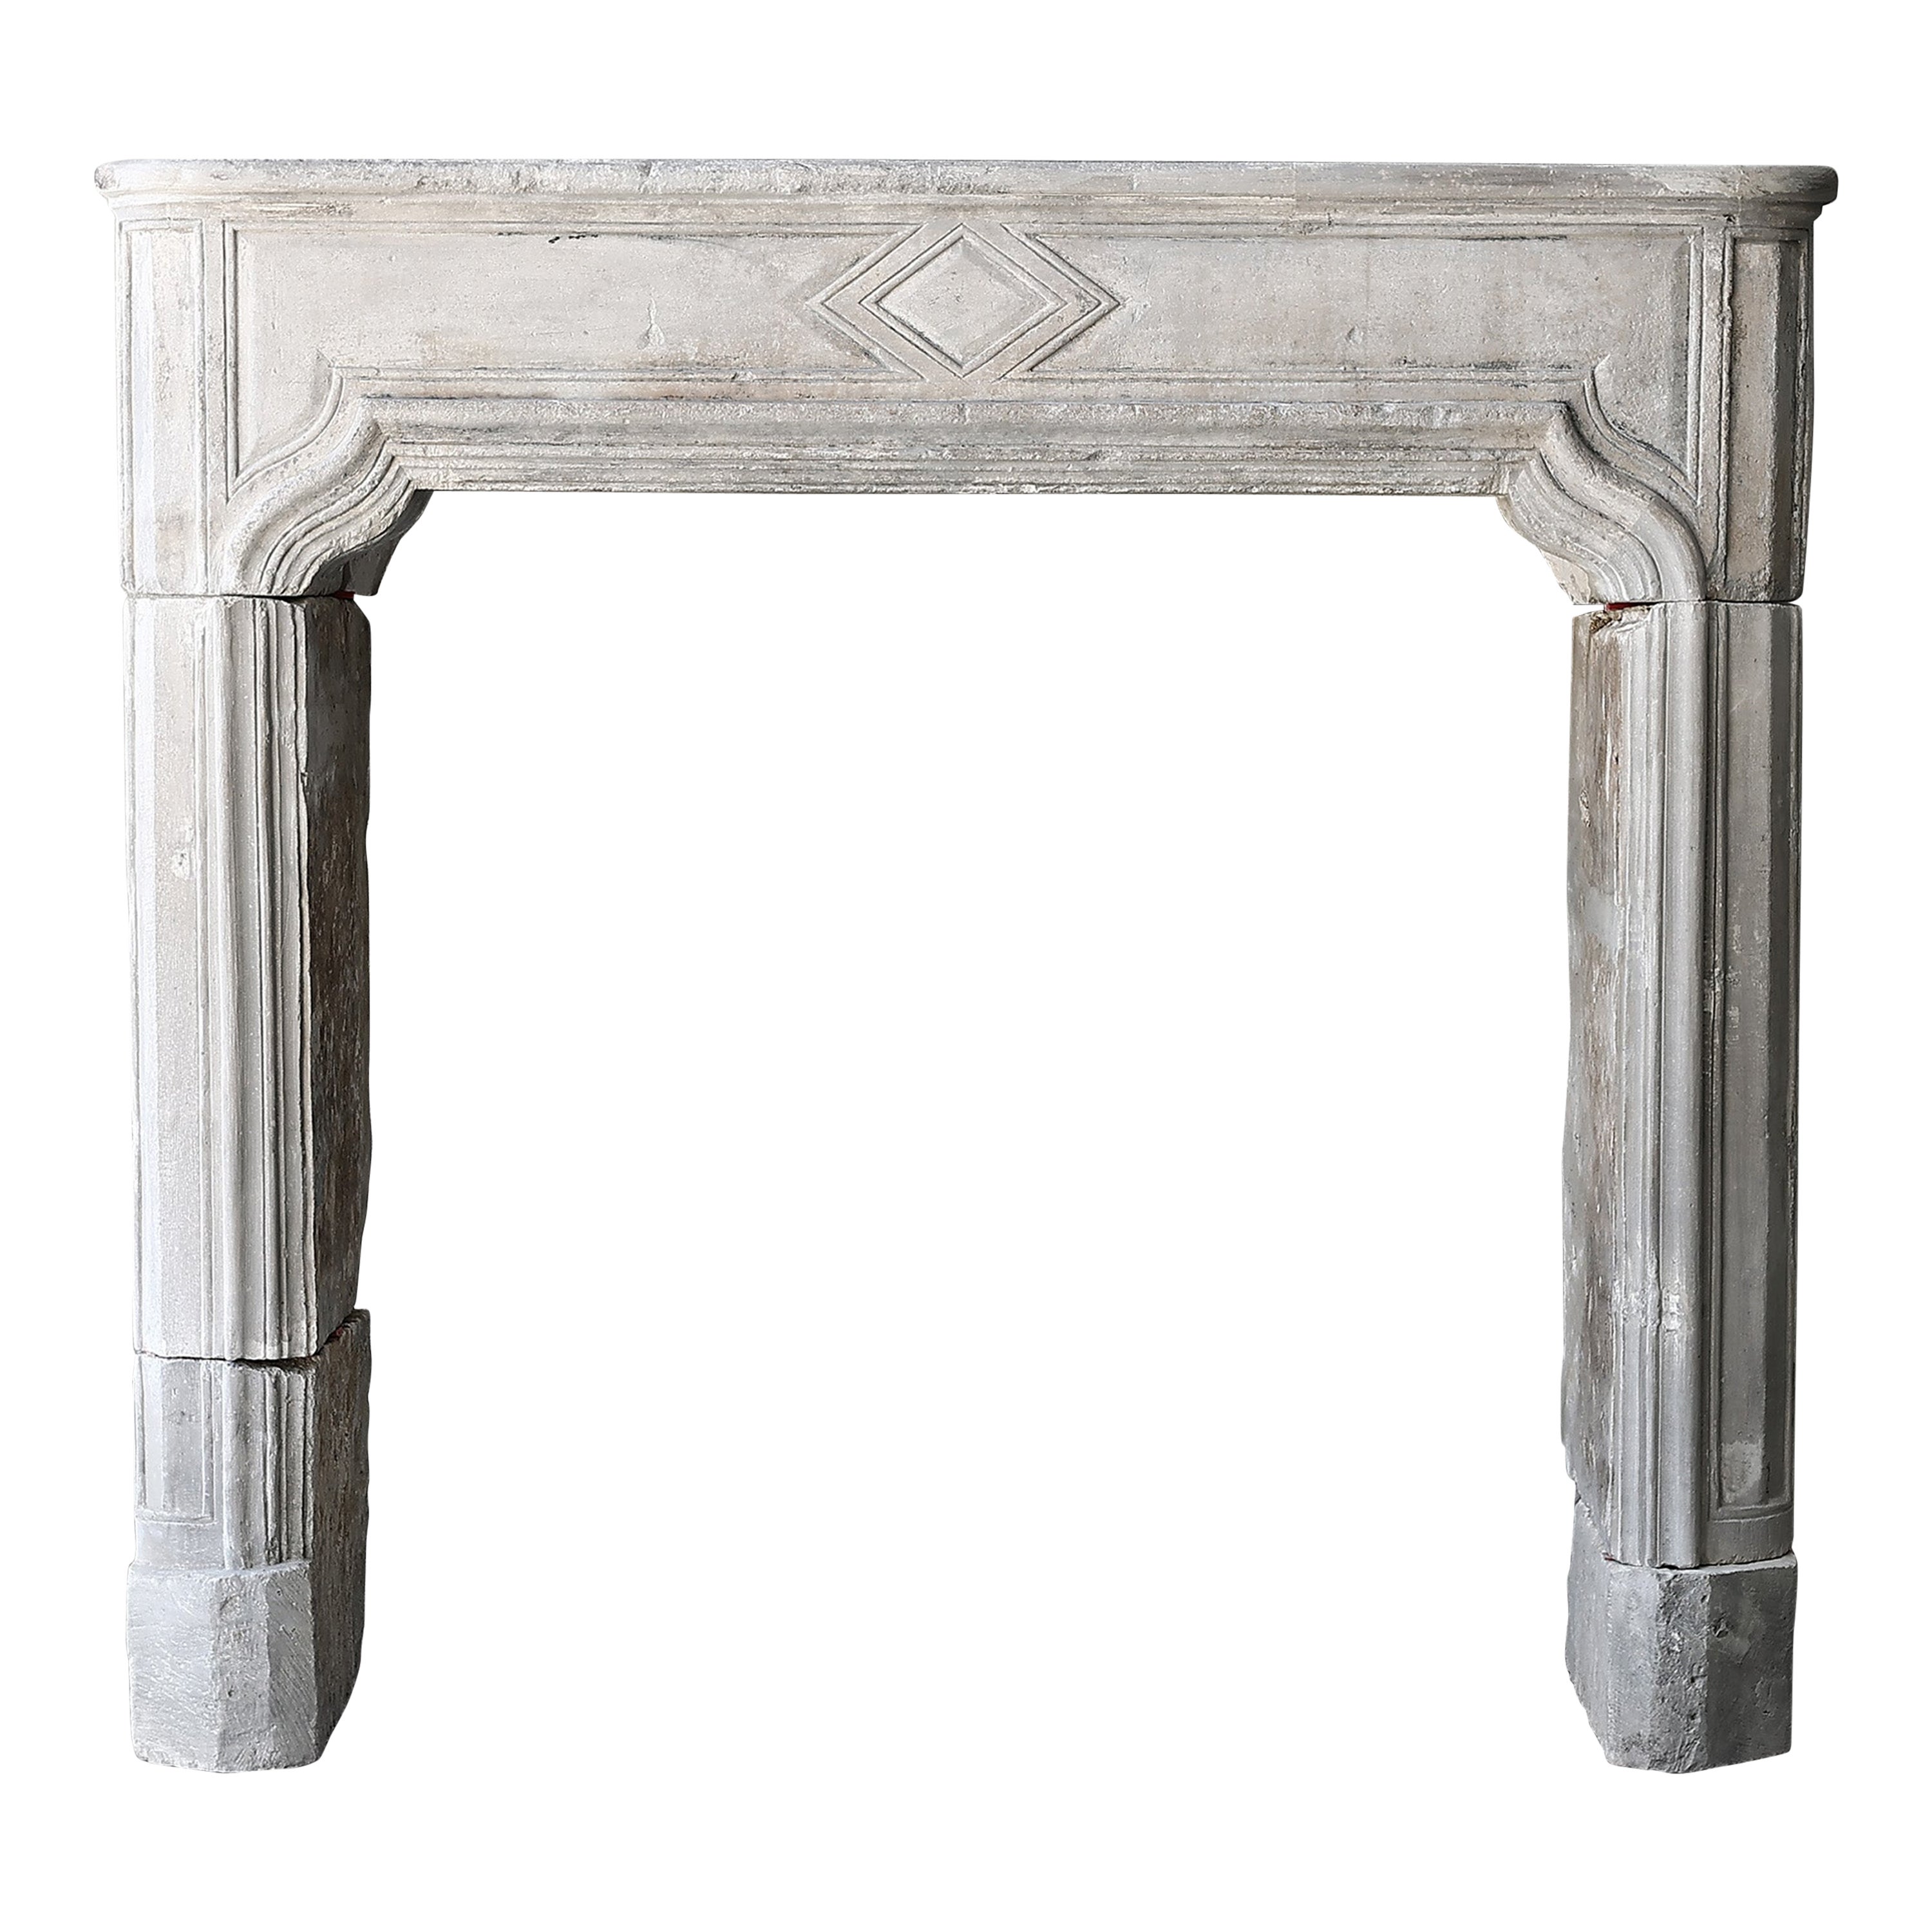 19th Century Fireplace of French limestone in Style of Louis XVI